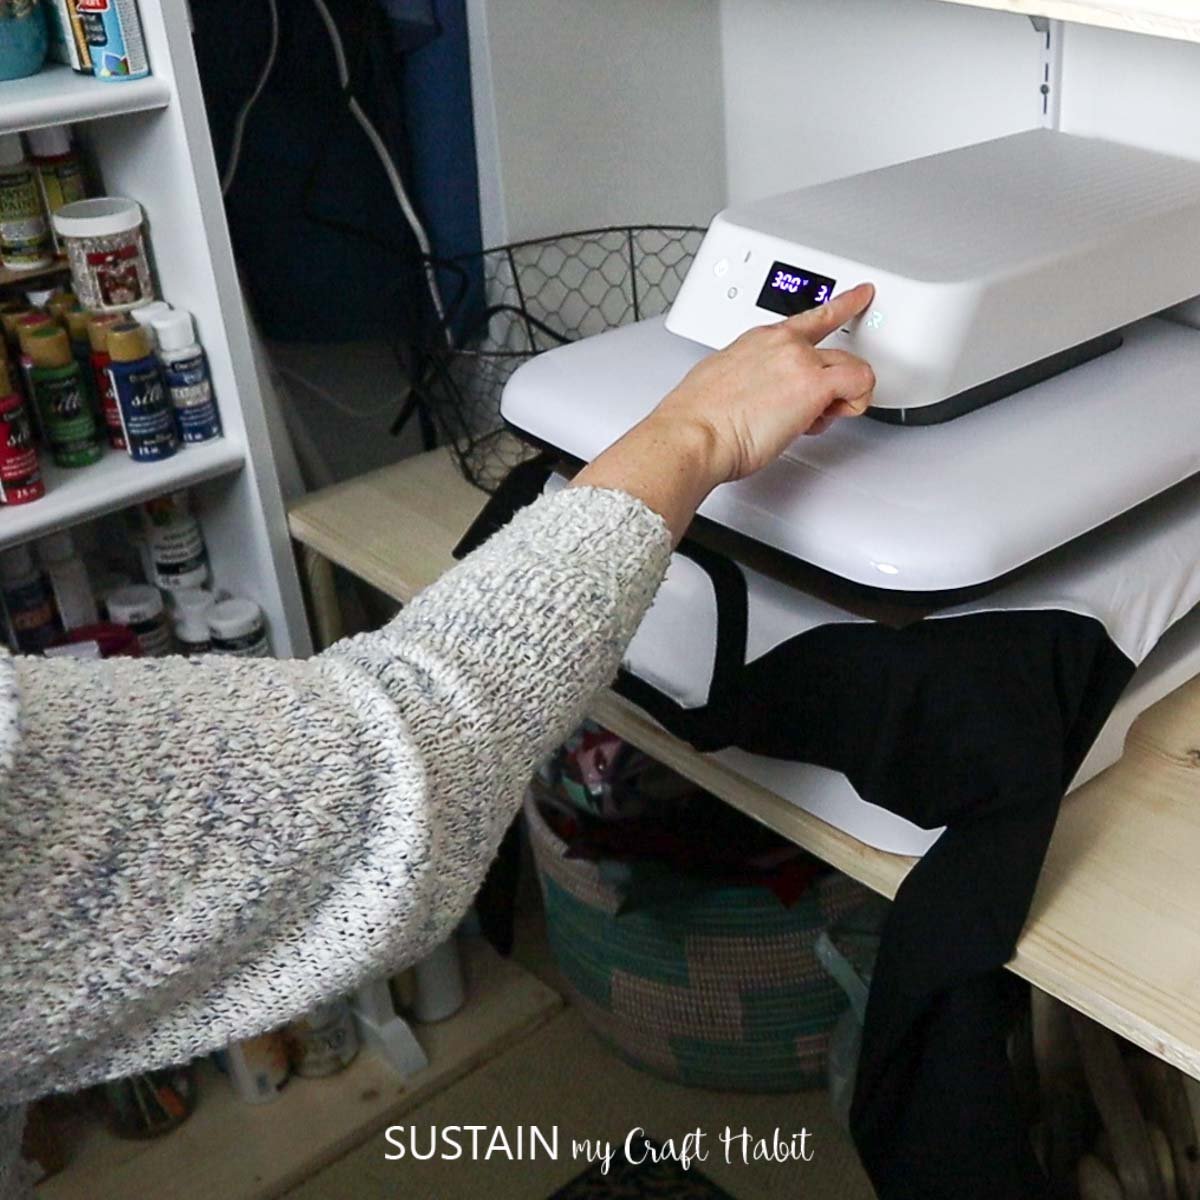 Review of the HTVRONT Auto Heat Press Machine: Perfect for